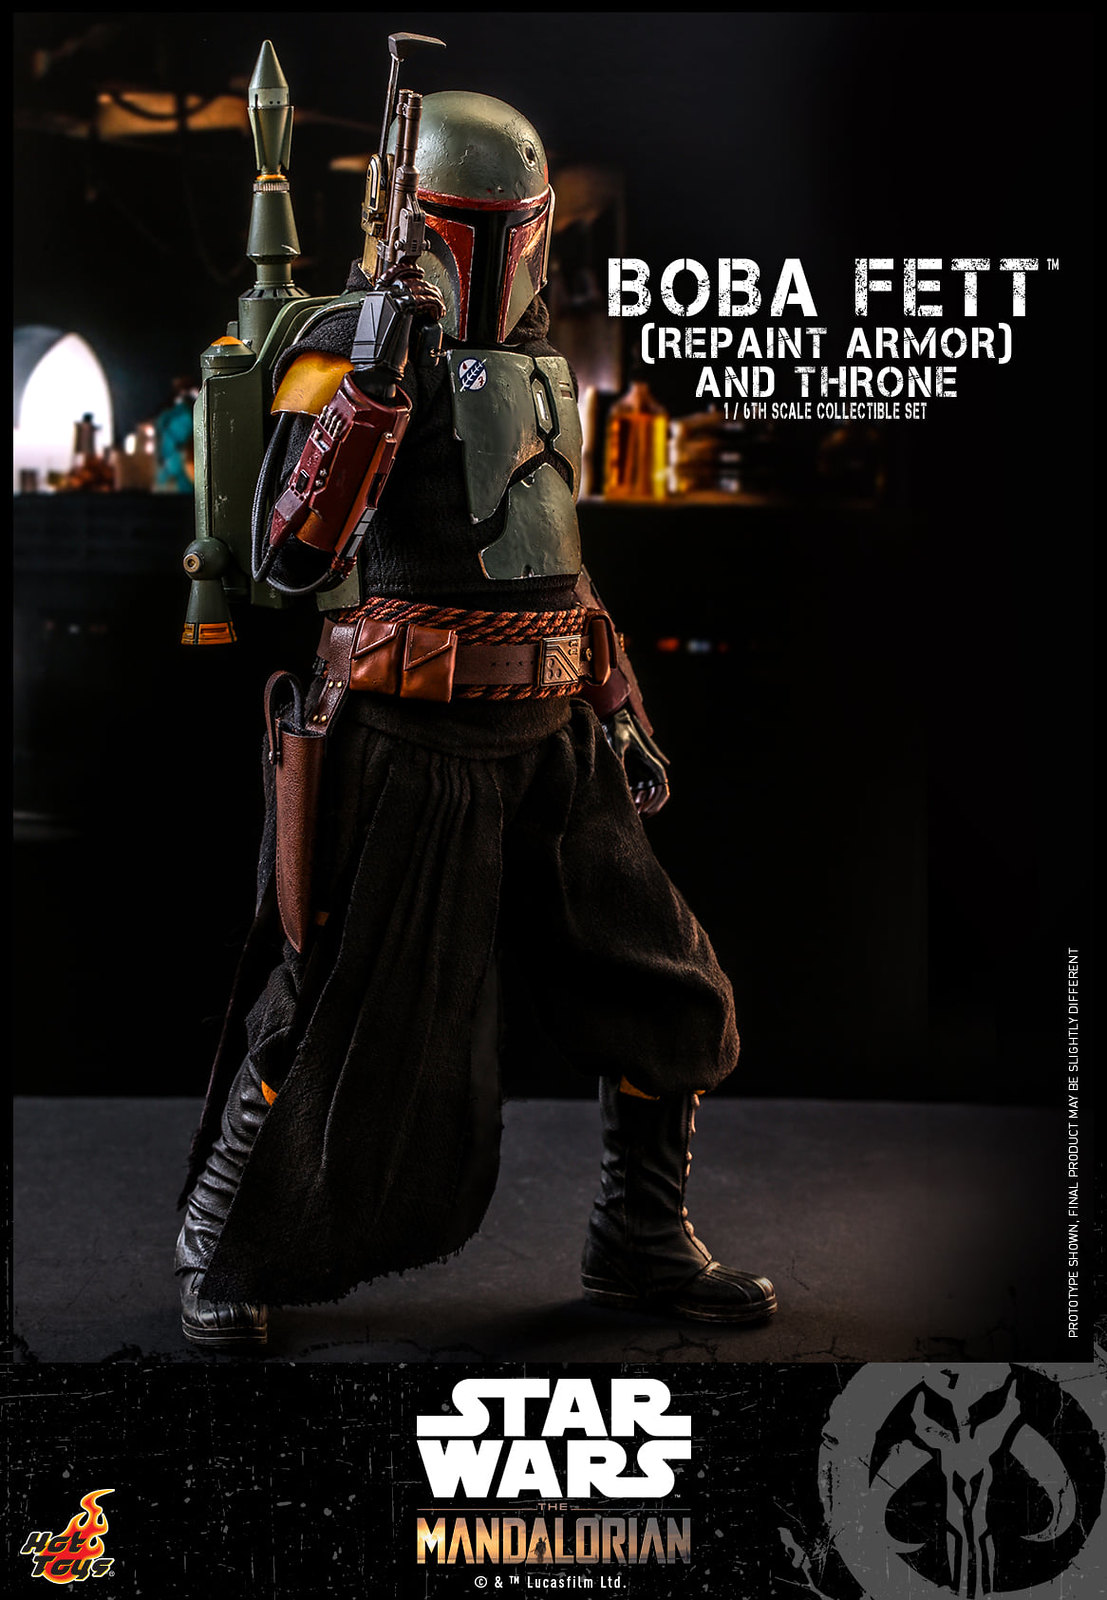 Star Wars: The Mandalorian™ - 1/6th scale Boba Fett™ (Repaint Armor) Collectible figure/ figure and Throne Collectible Set 51312296990_8e8aa8fbb6_h